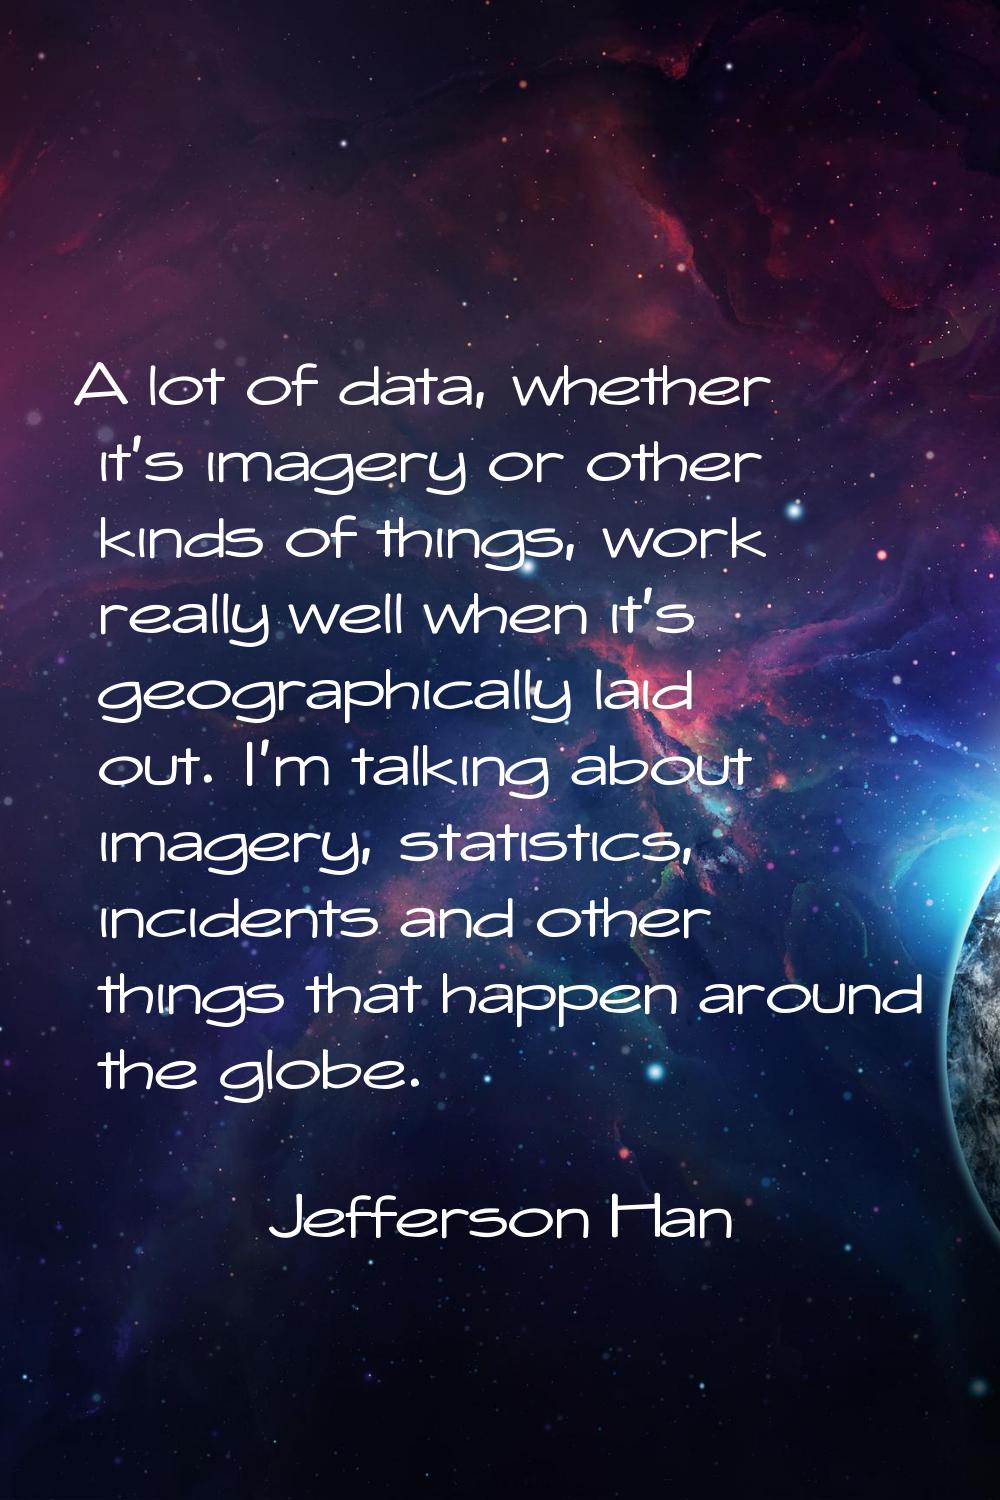 A lot of data, whether it's imagery or other kinds of things, work really well when it's geographic